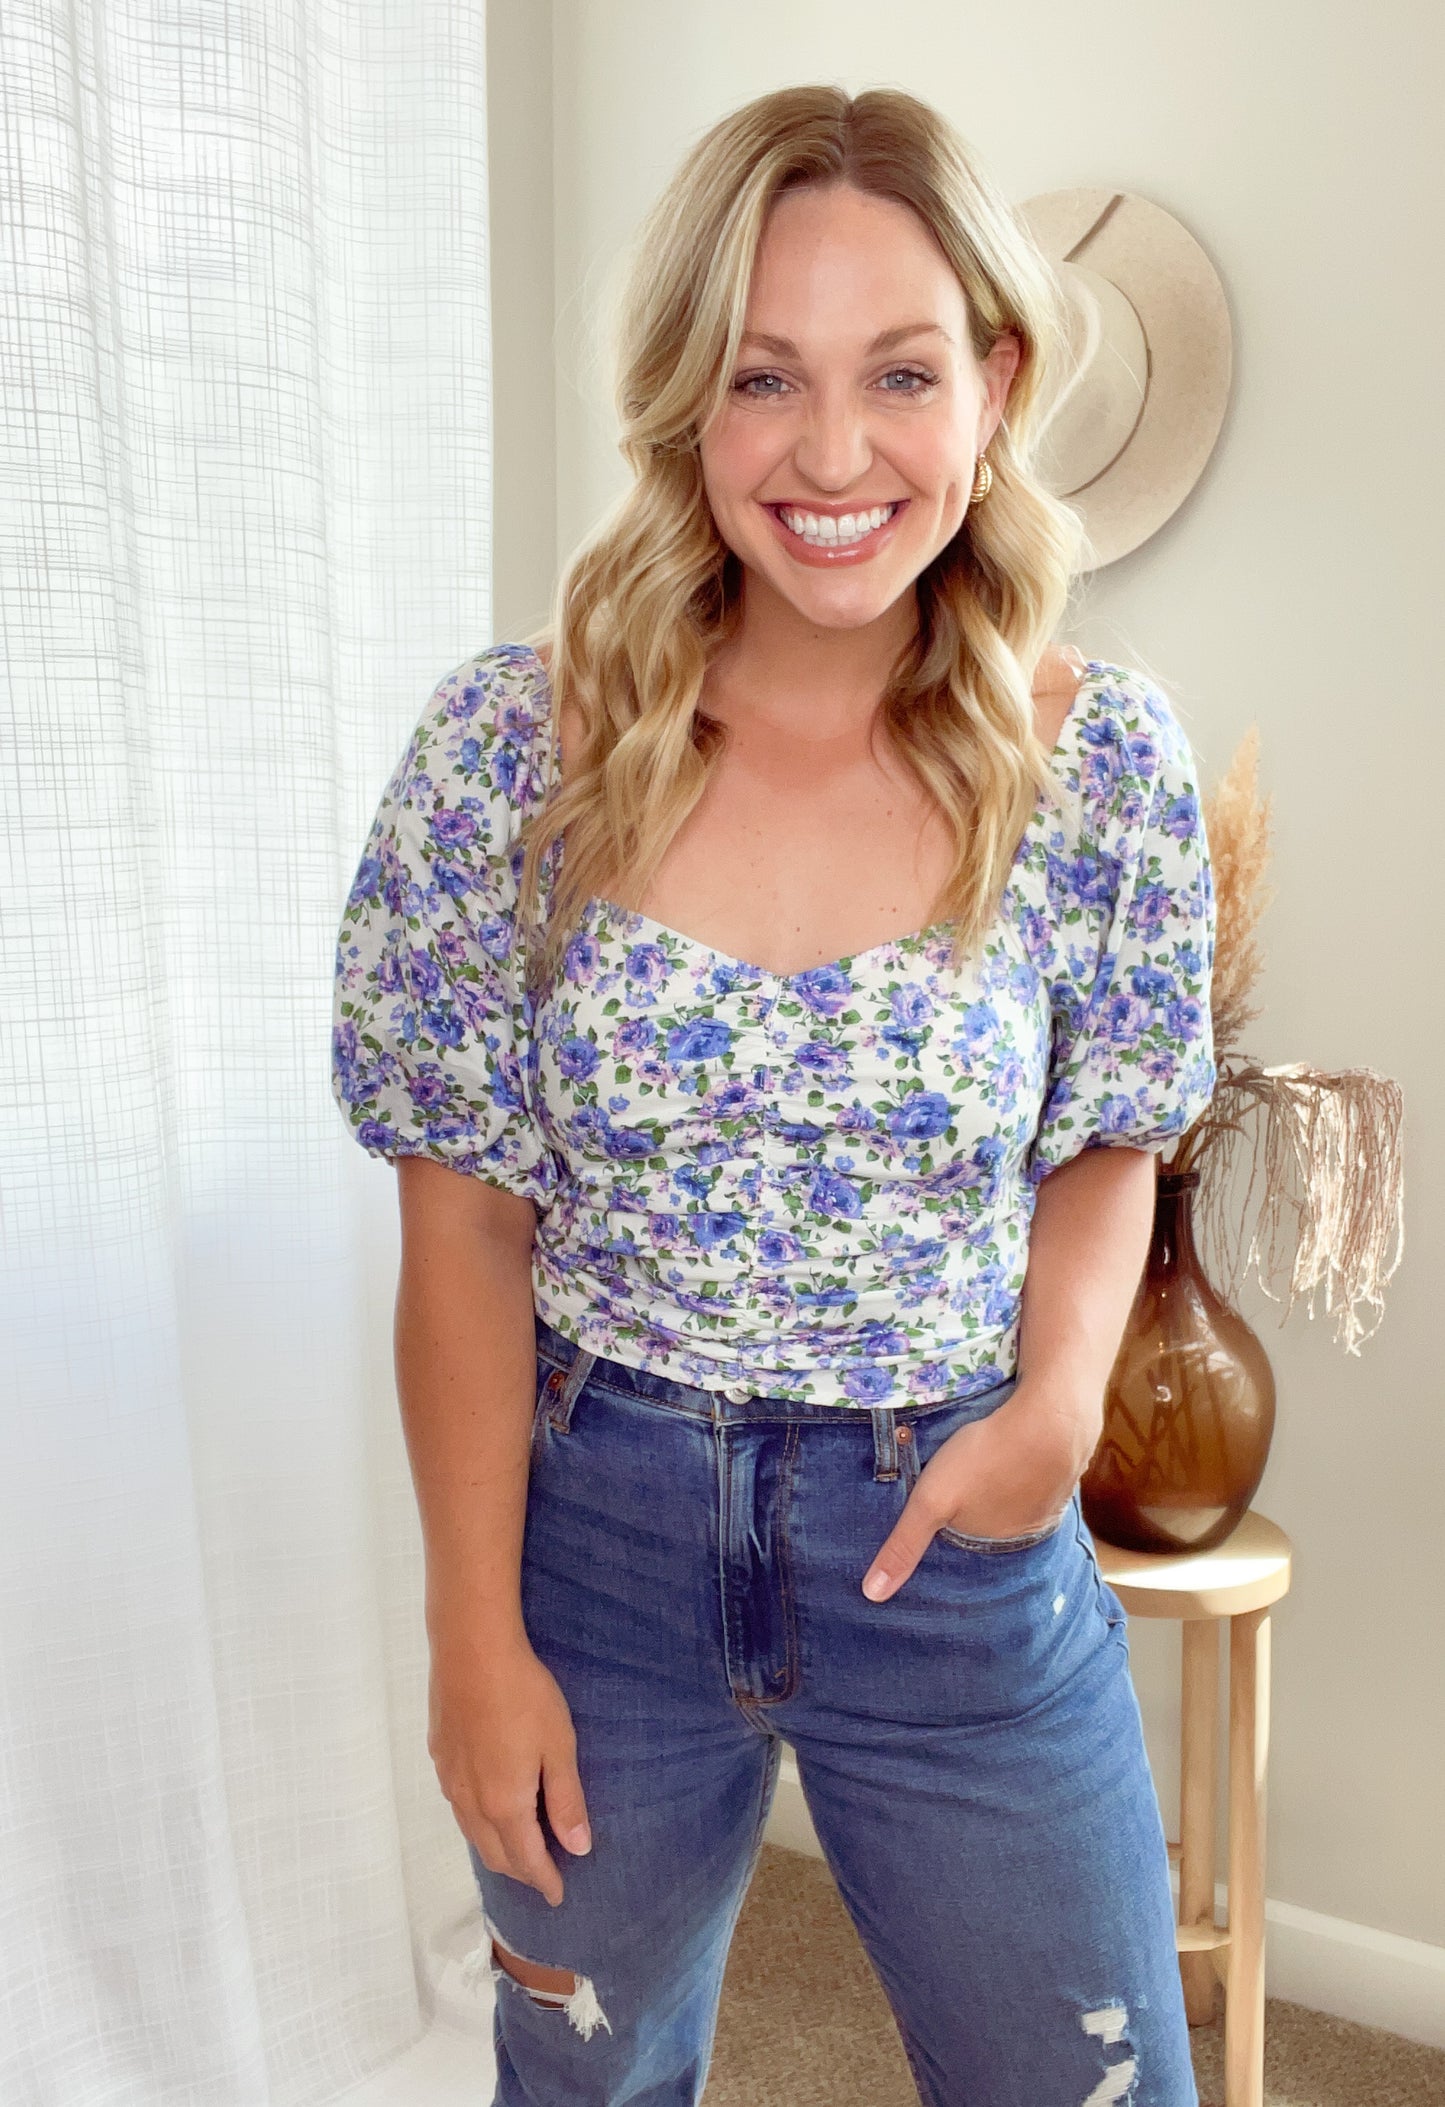 The Blue Floral Top